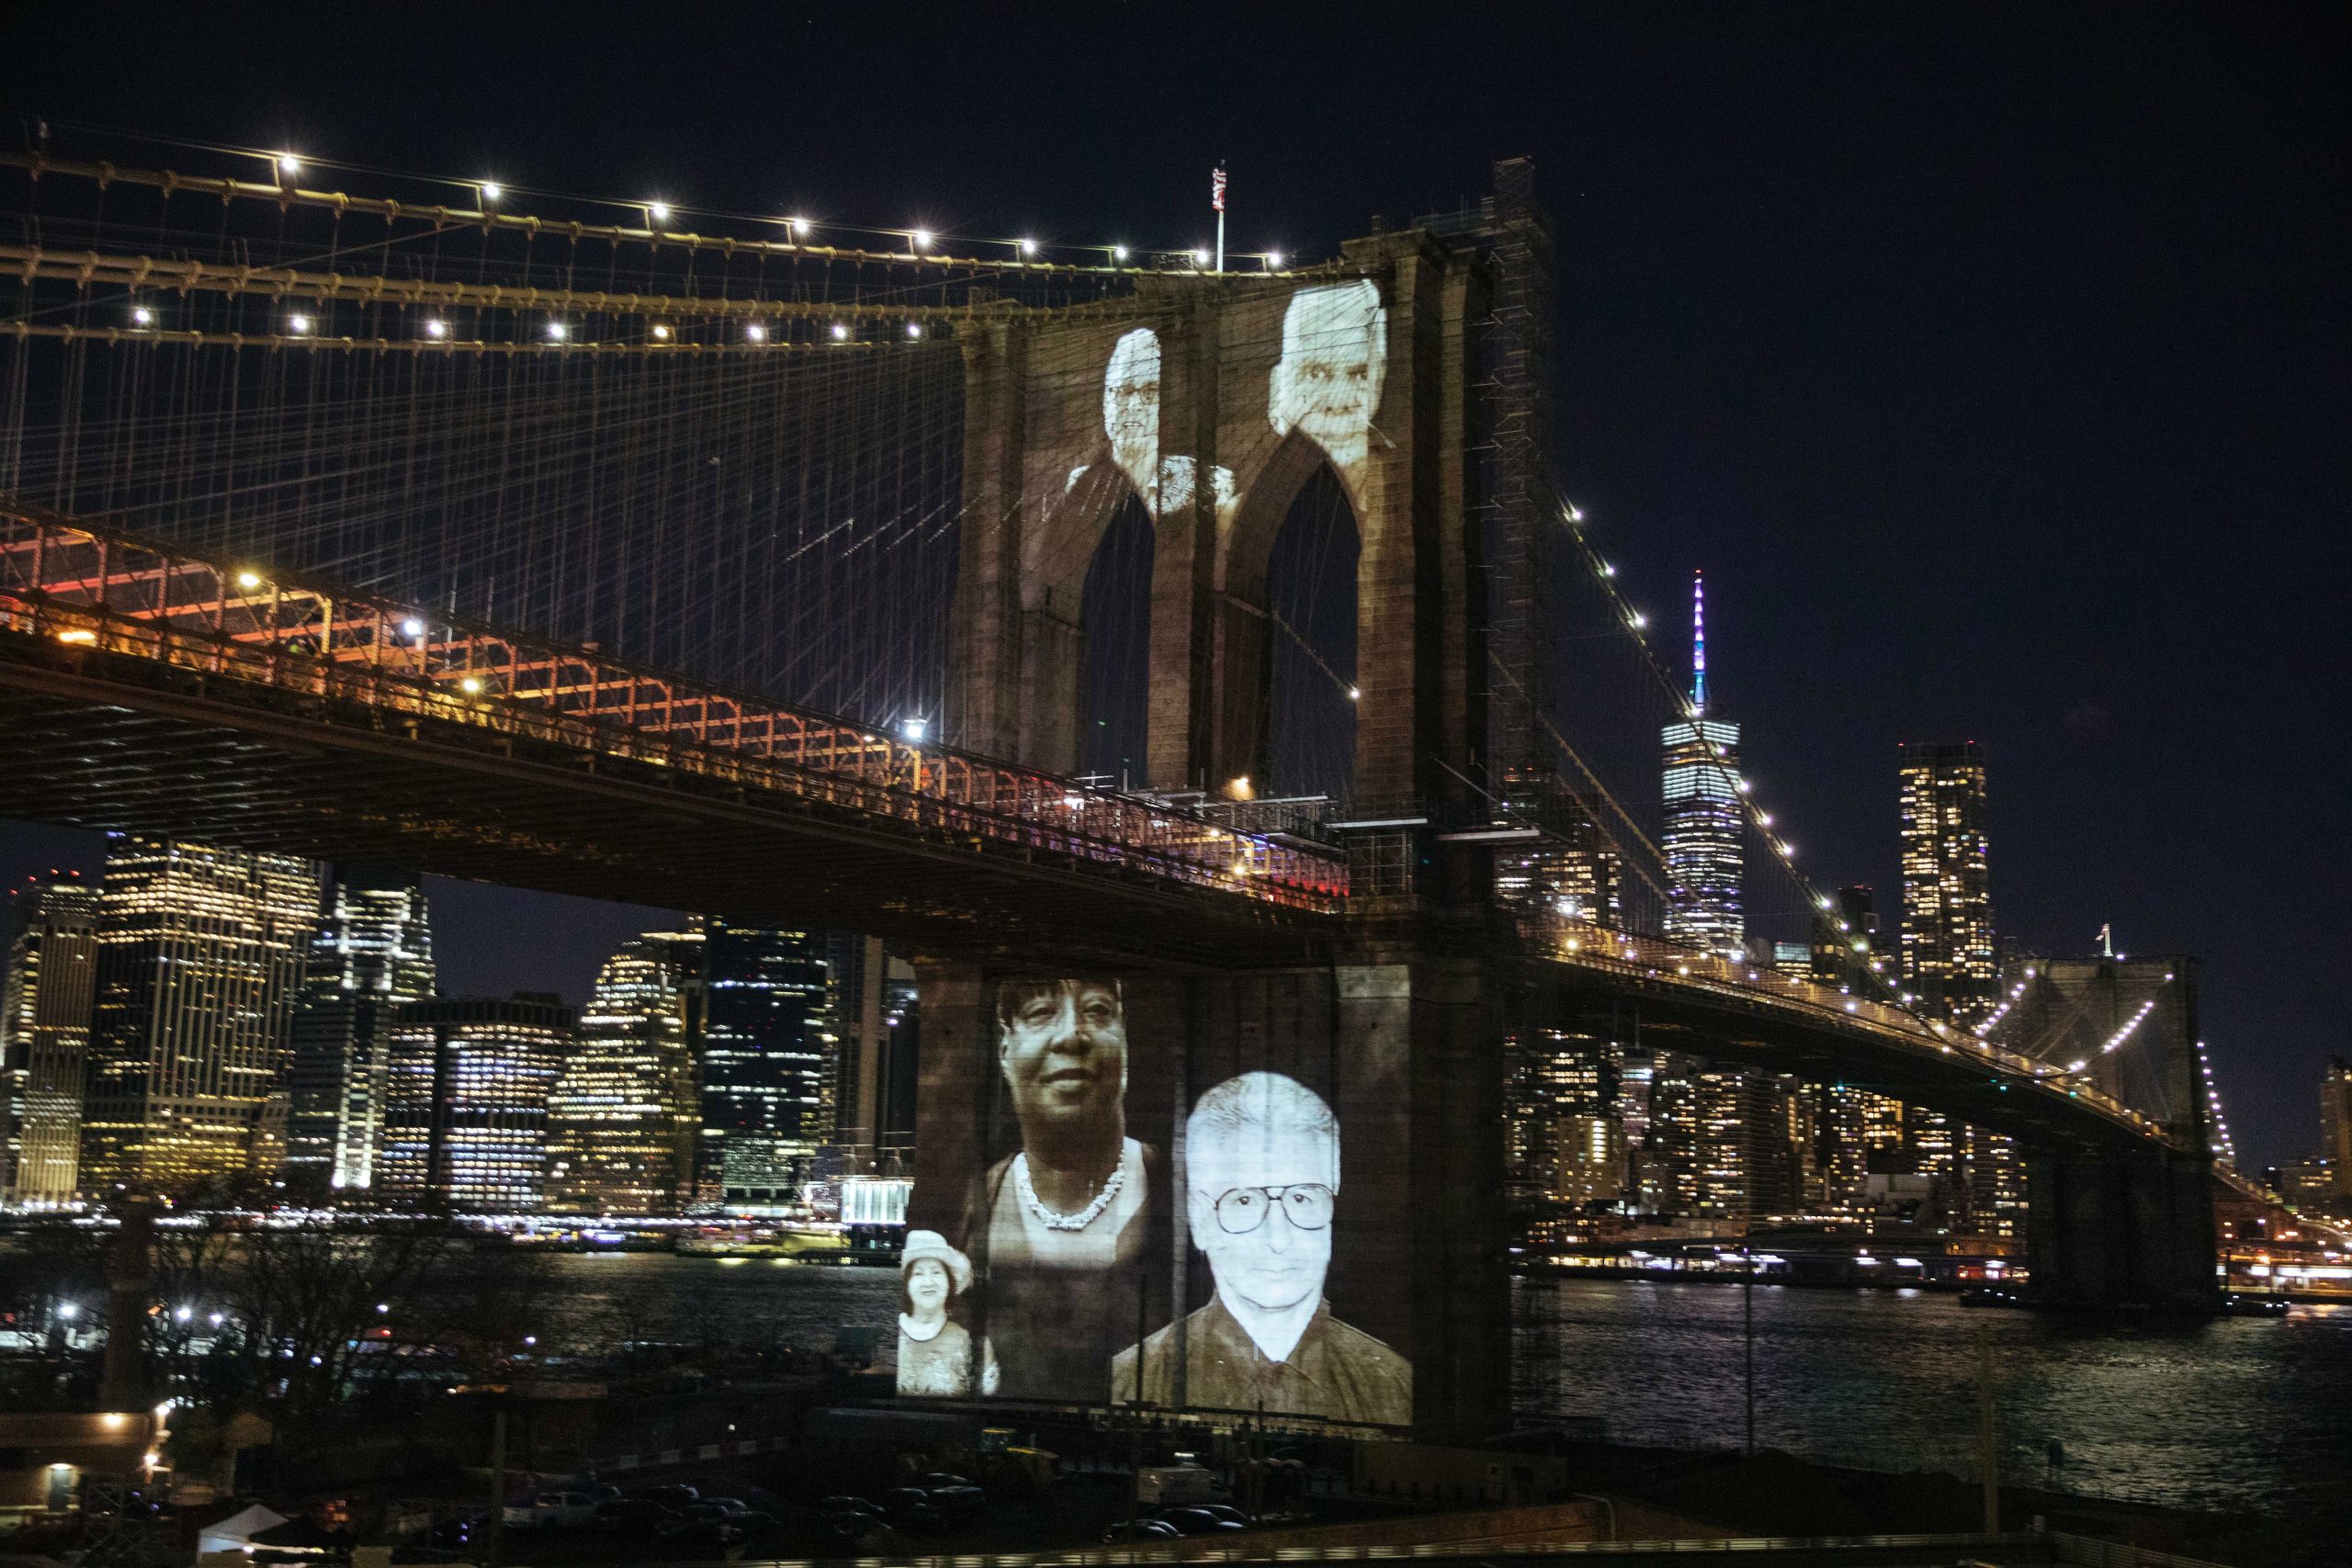 epa09075223 Images of people who died from complications related to the COVID-19 disease are projected on the Brooklyn Bridge during a commemoration ceremony to remember New Yorkers lost during the COVID-19 pandemic in the Brooklyn borough of New York, New York, USA, 14 March 2021. Over 30,000 people have died in New York City as a result of the coronavirus pandemic which began in the United States a year ago this month.  EPA/KEVIN HAGEN / POOL